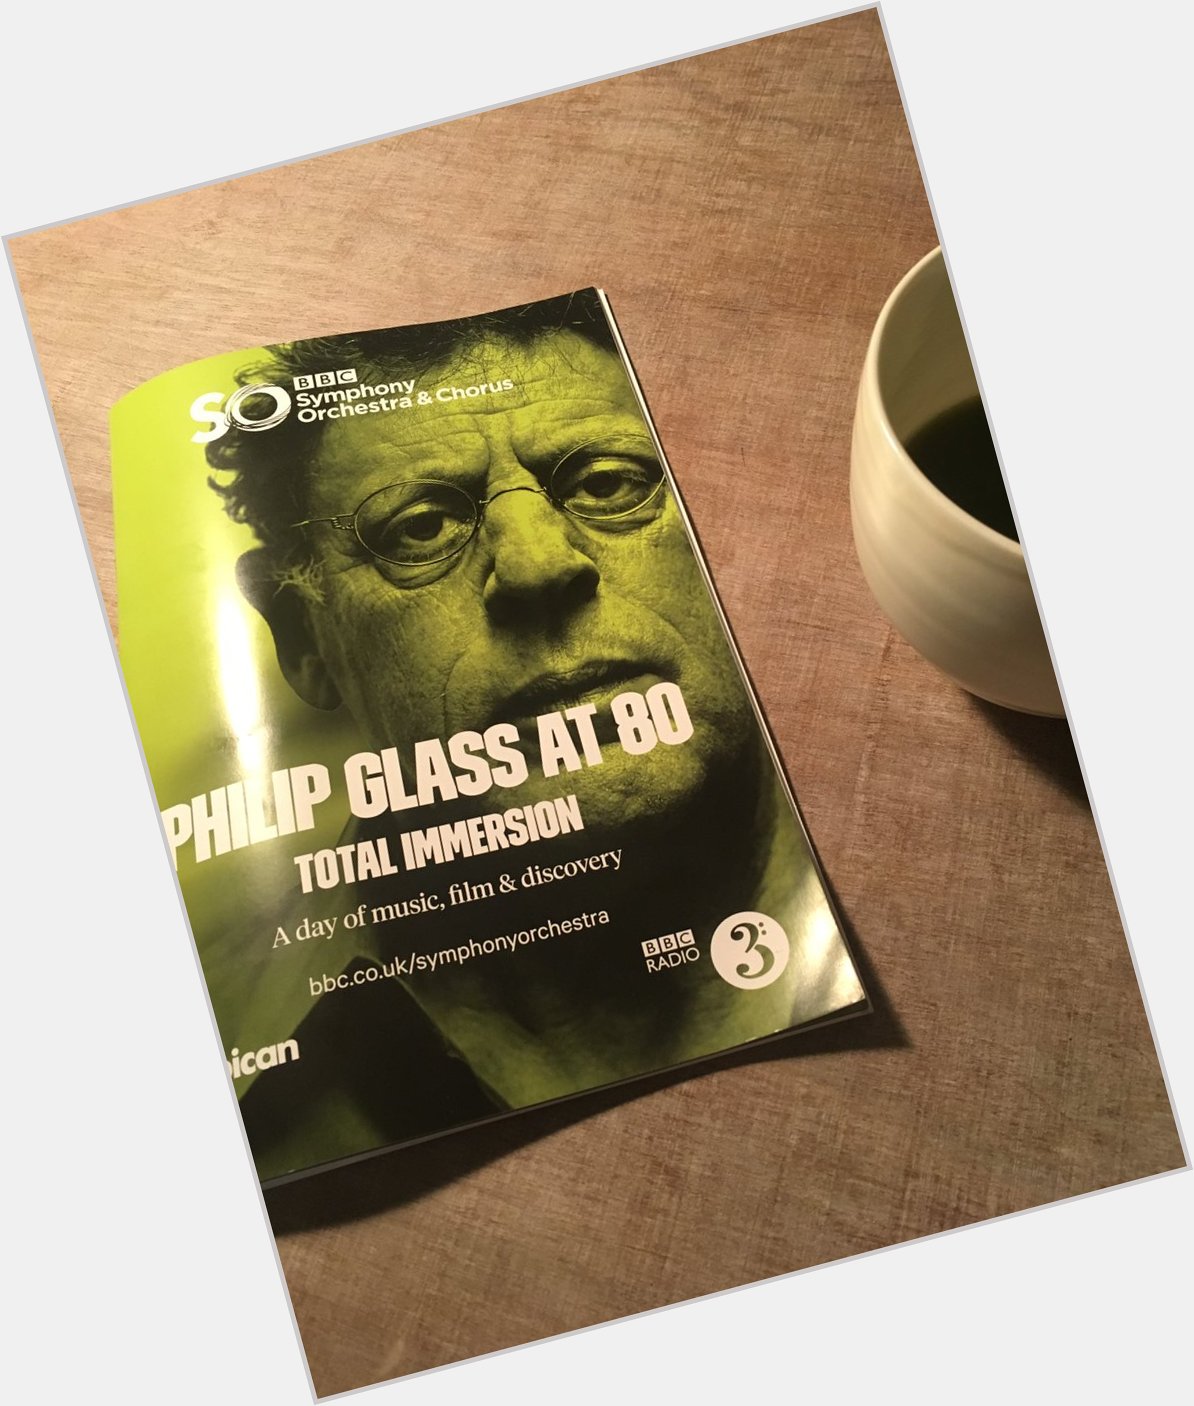 Happy Birthday ! Once more thank you for great day with Philip Glass music! 